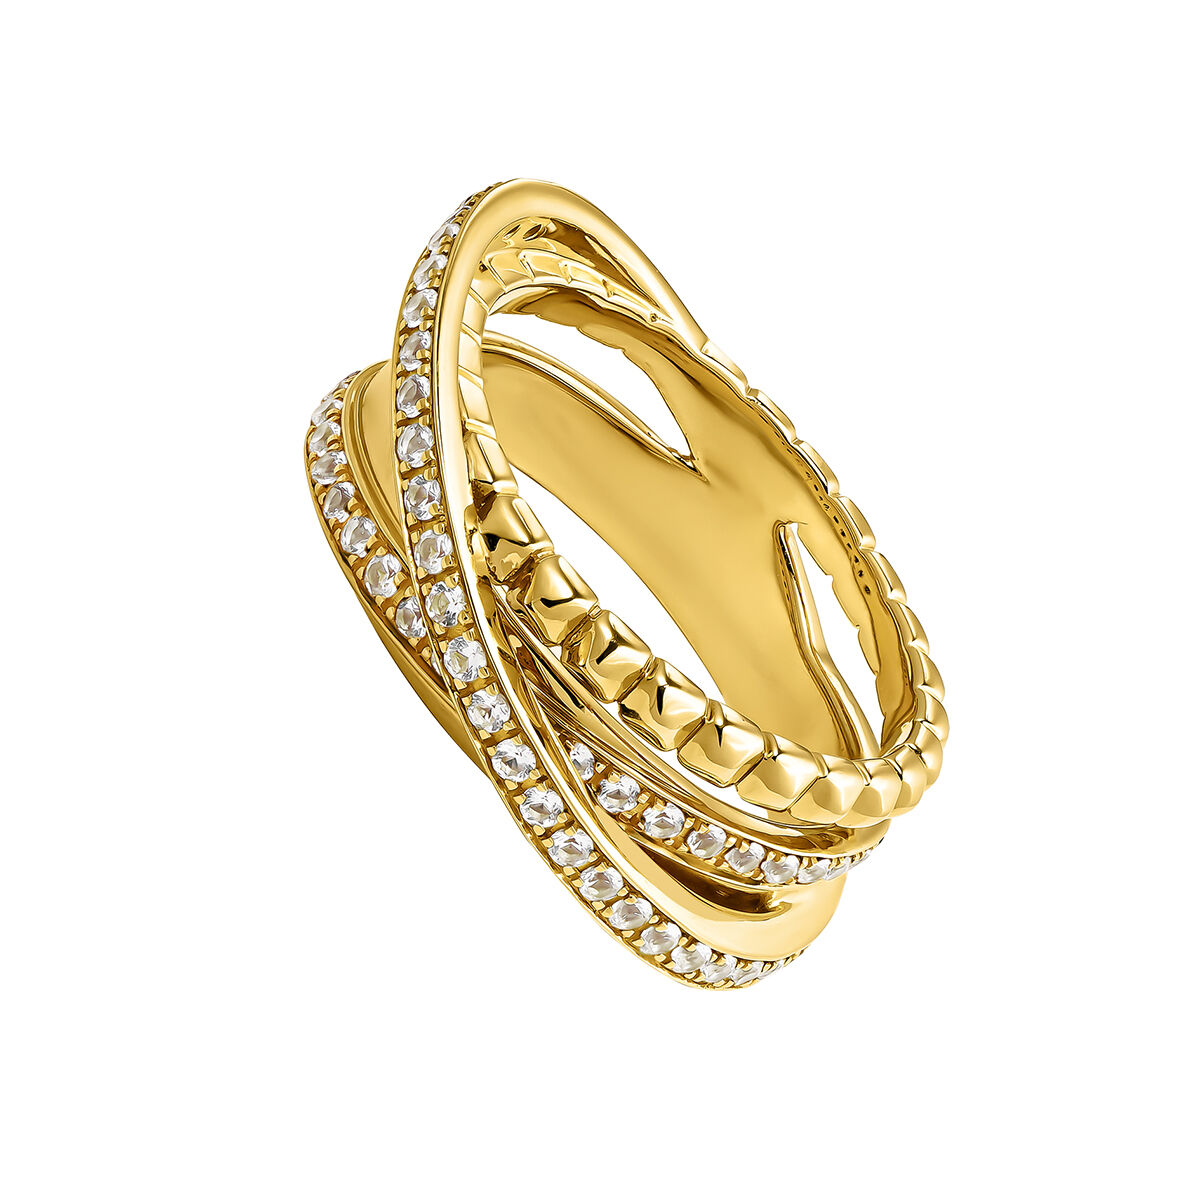 Crossover ring with multiple bands in 18ct yellow gold-plated silver with white topaz stones, J04907-02-WT, hi-res